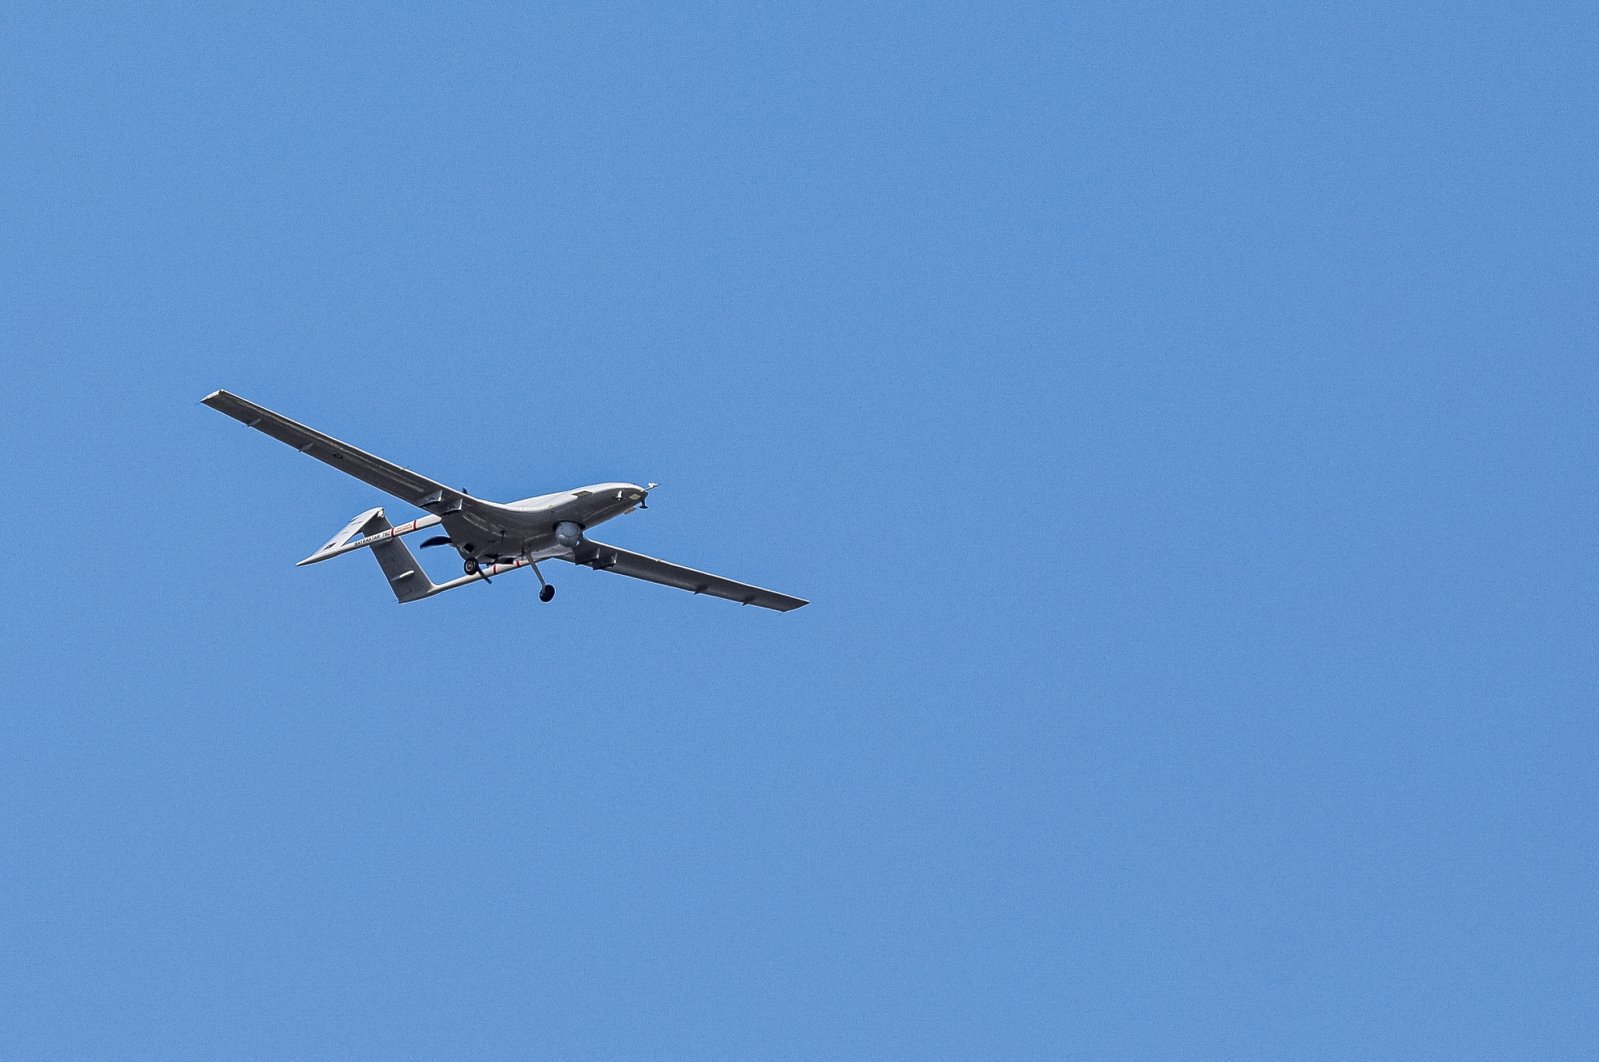 A Bayraktar TB2 unmanned combat aerial vehicle is seen during a demonstration flight at the Teknofest aerospace and technology festival in Baku, Azerbaijan, May 27, 2022. (Reuters Photo)